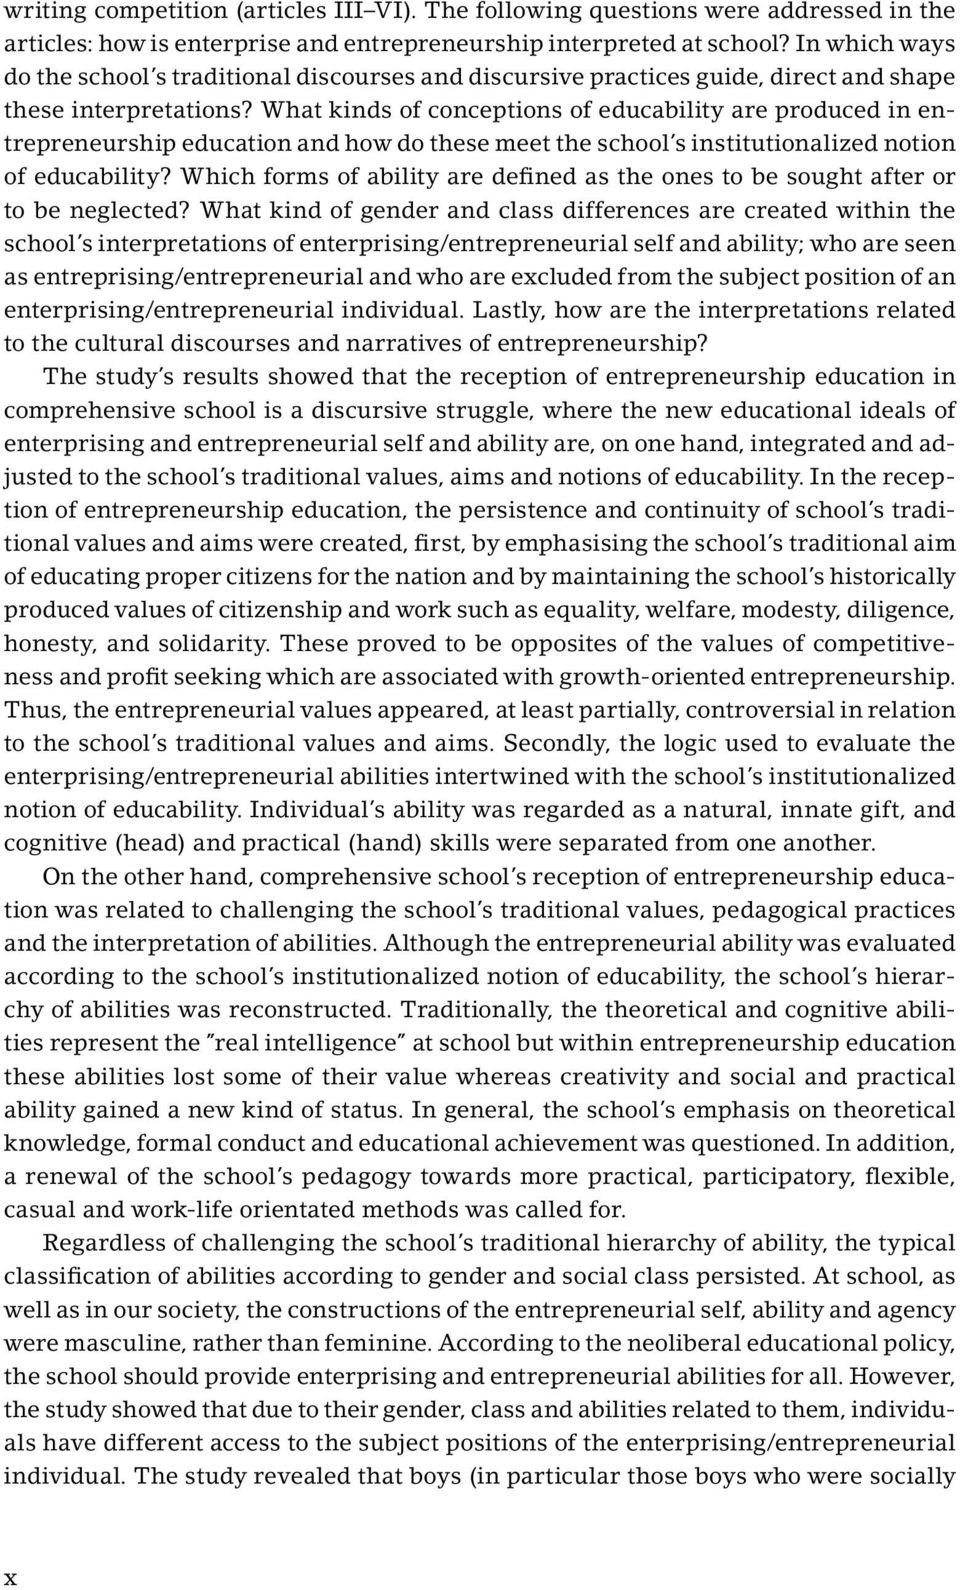 What kinds of conceptions of educability are produced in entrepreneurship education and how do these meet the school s institutionalized notion of educability?